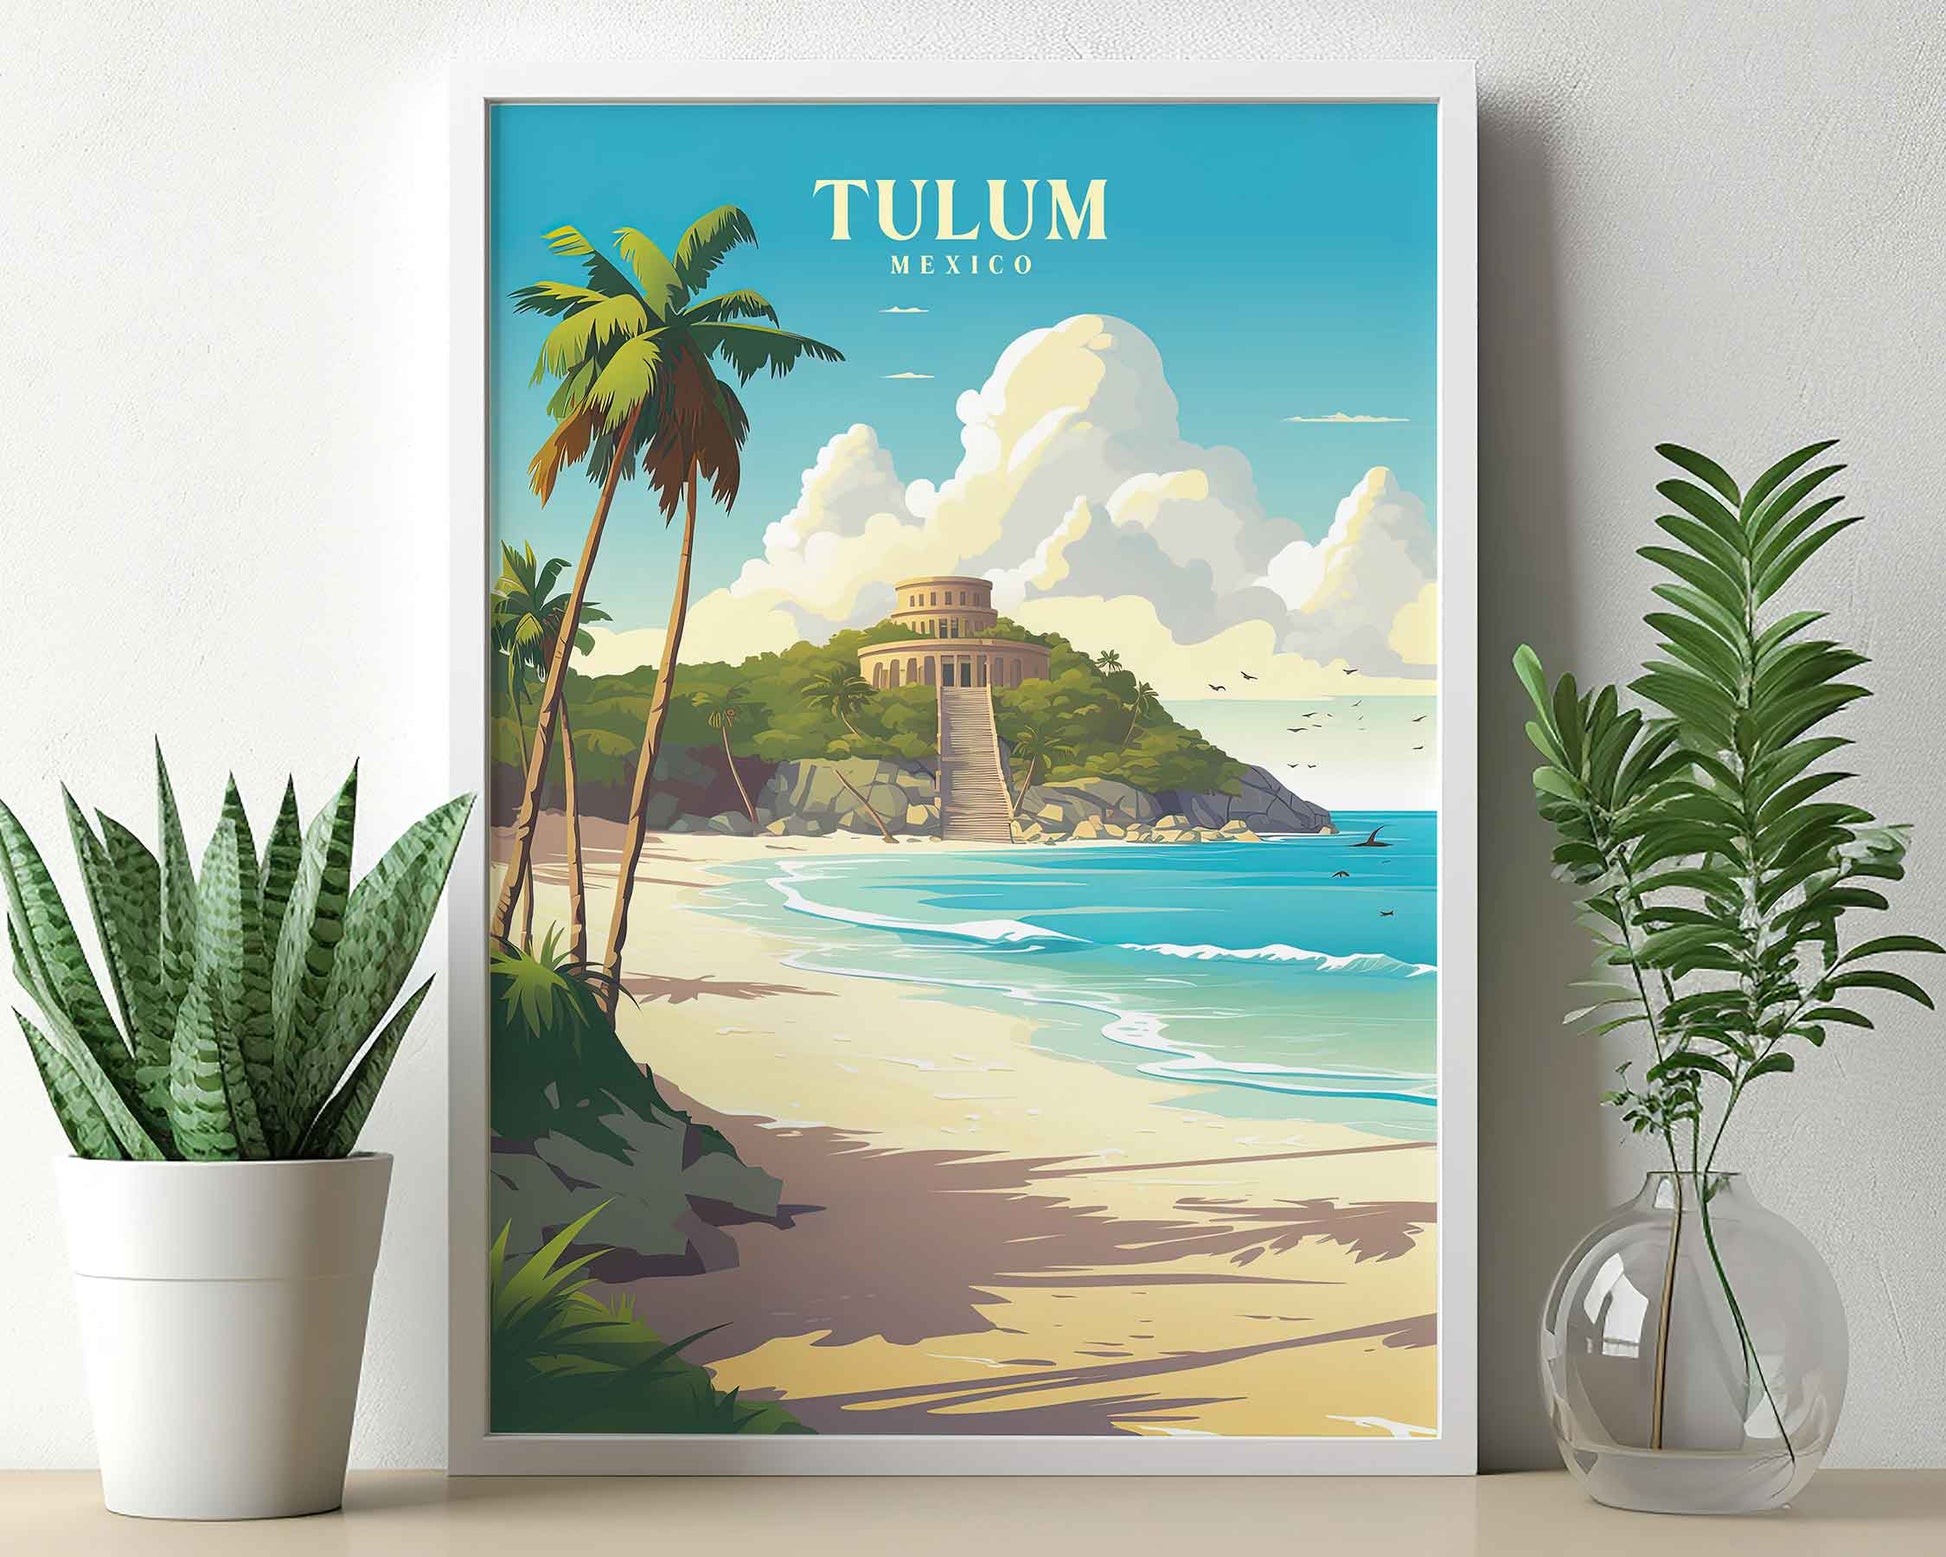 Framed Image of Tulum Mexico Travel Print Tourism Wall Art Poster Illustration